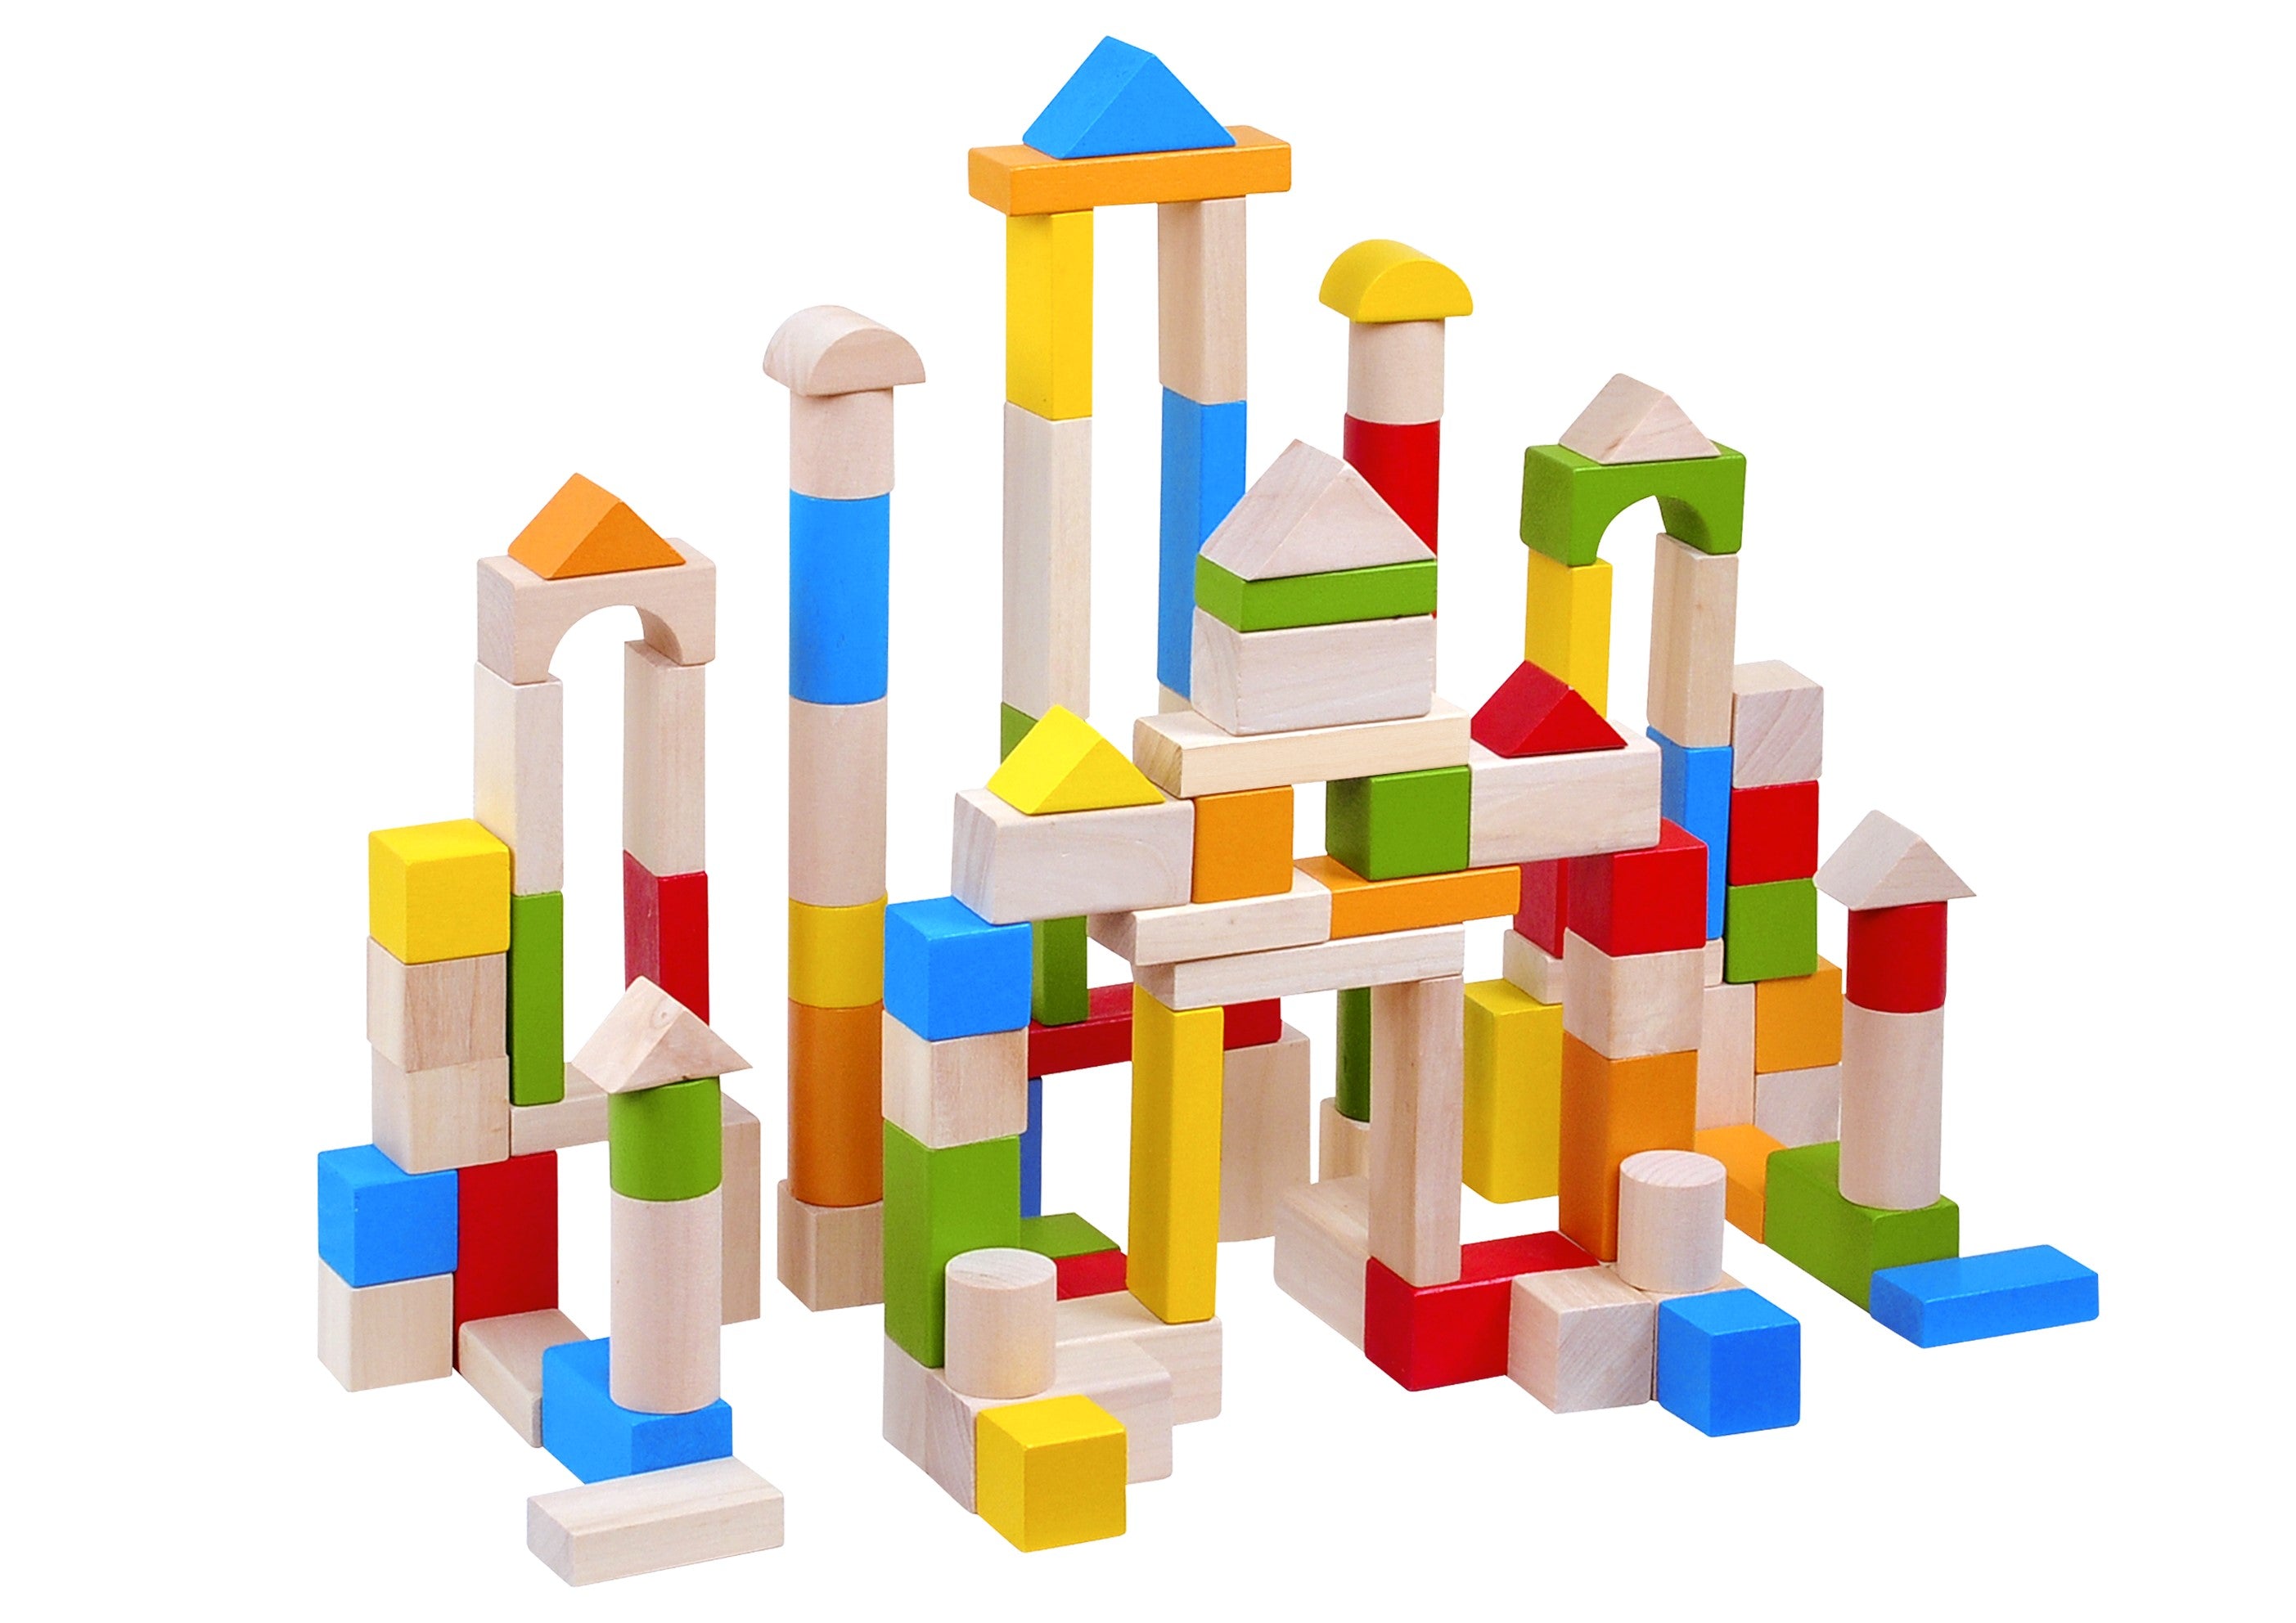 Toyster’s 100-Piece Wooden Colorful Classic Building Blocks